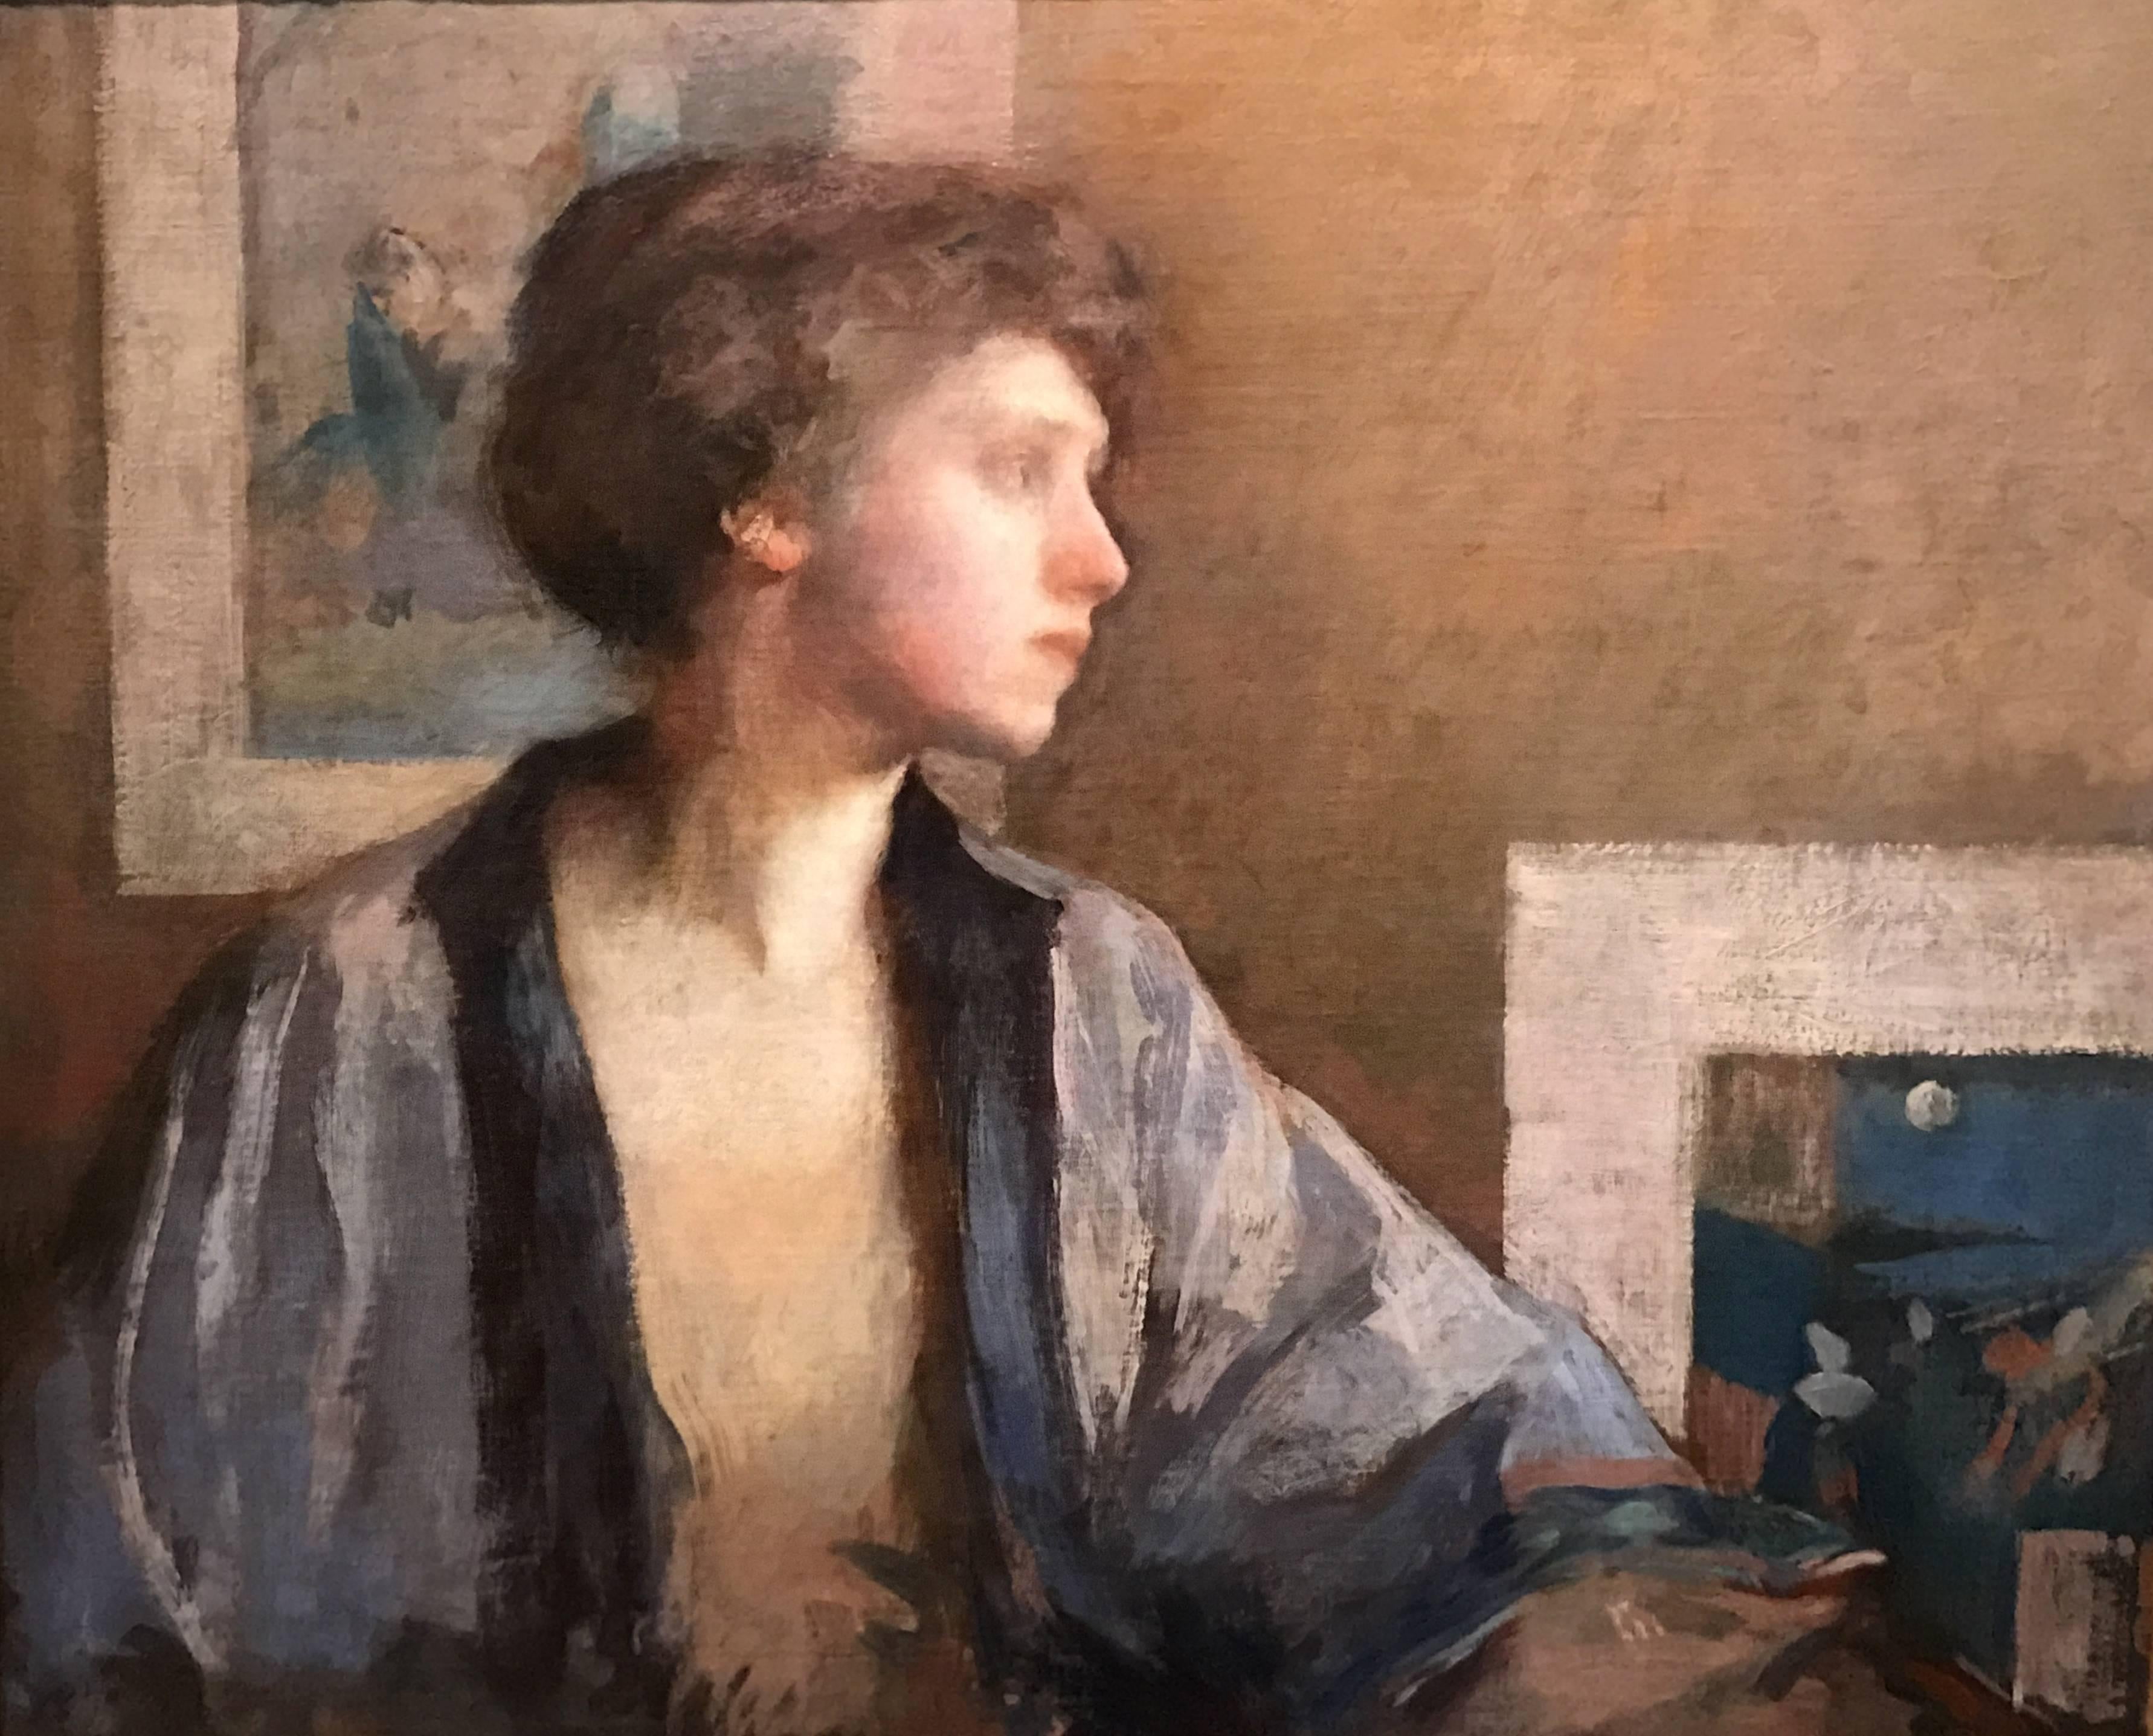 This fine Boston School portrait of California artist Patrice Borgeson (b. 1888) was painted by American artist Frederick Andrew Bosley (1881-1942). Bosley was born in Lebanon, New Hampshire. He was a painter of portraits, figures and still lifes.